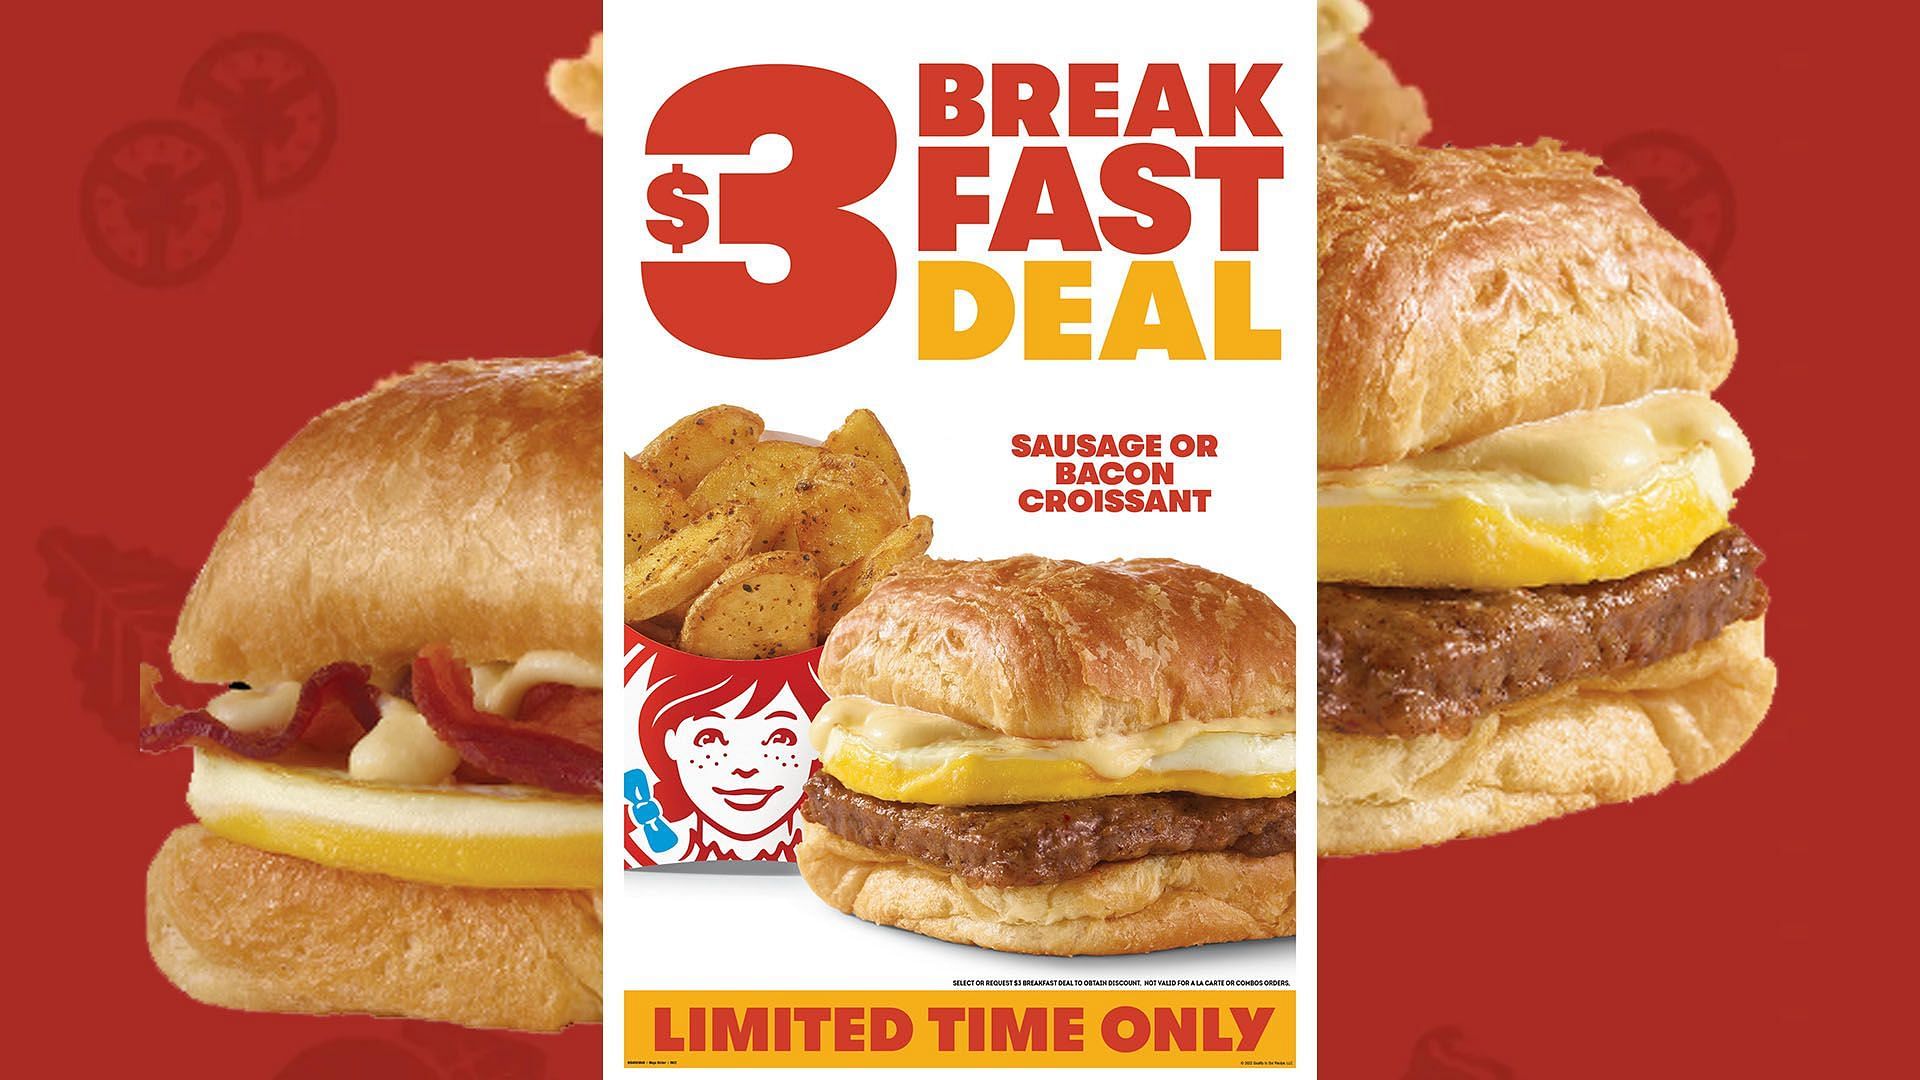 Wendy's 3 Breakfast Deal Release date, products, calories, and